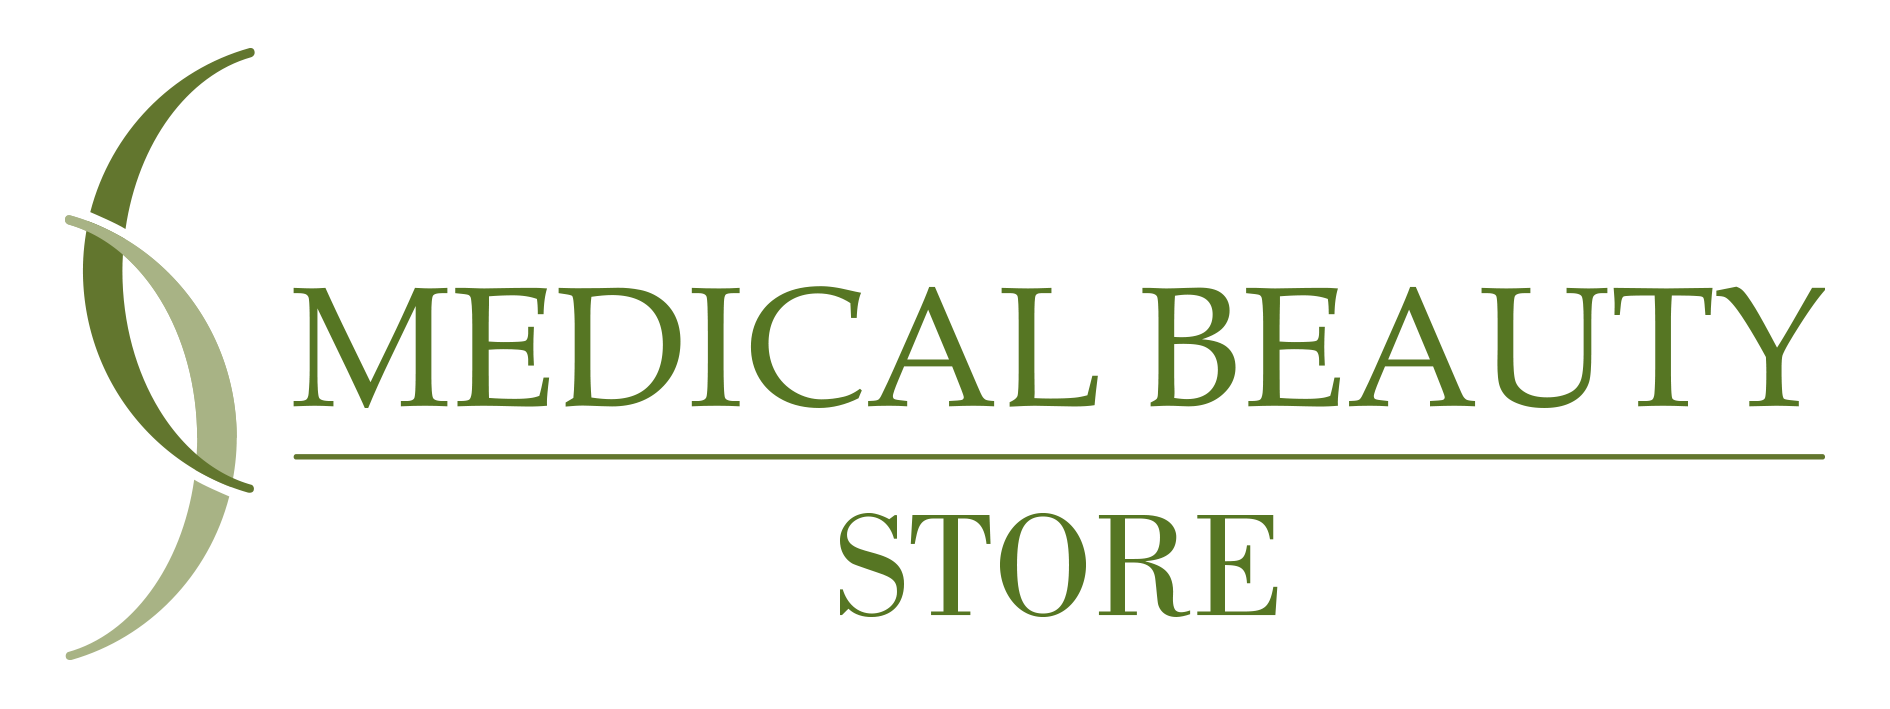 Medical Beauty Store